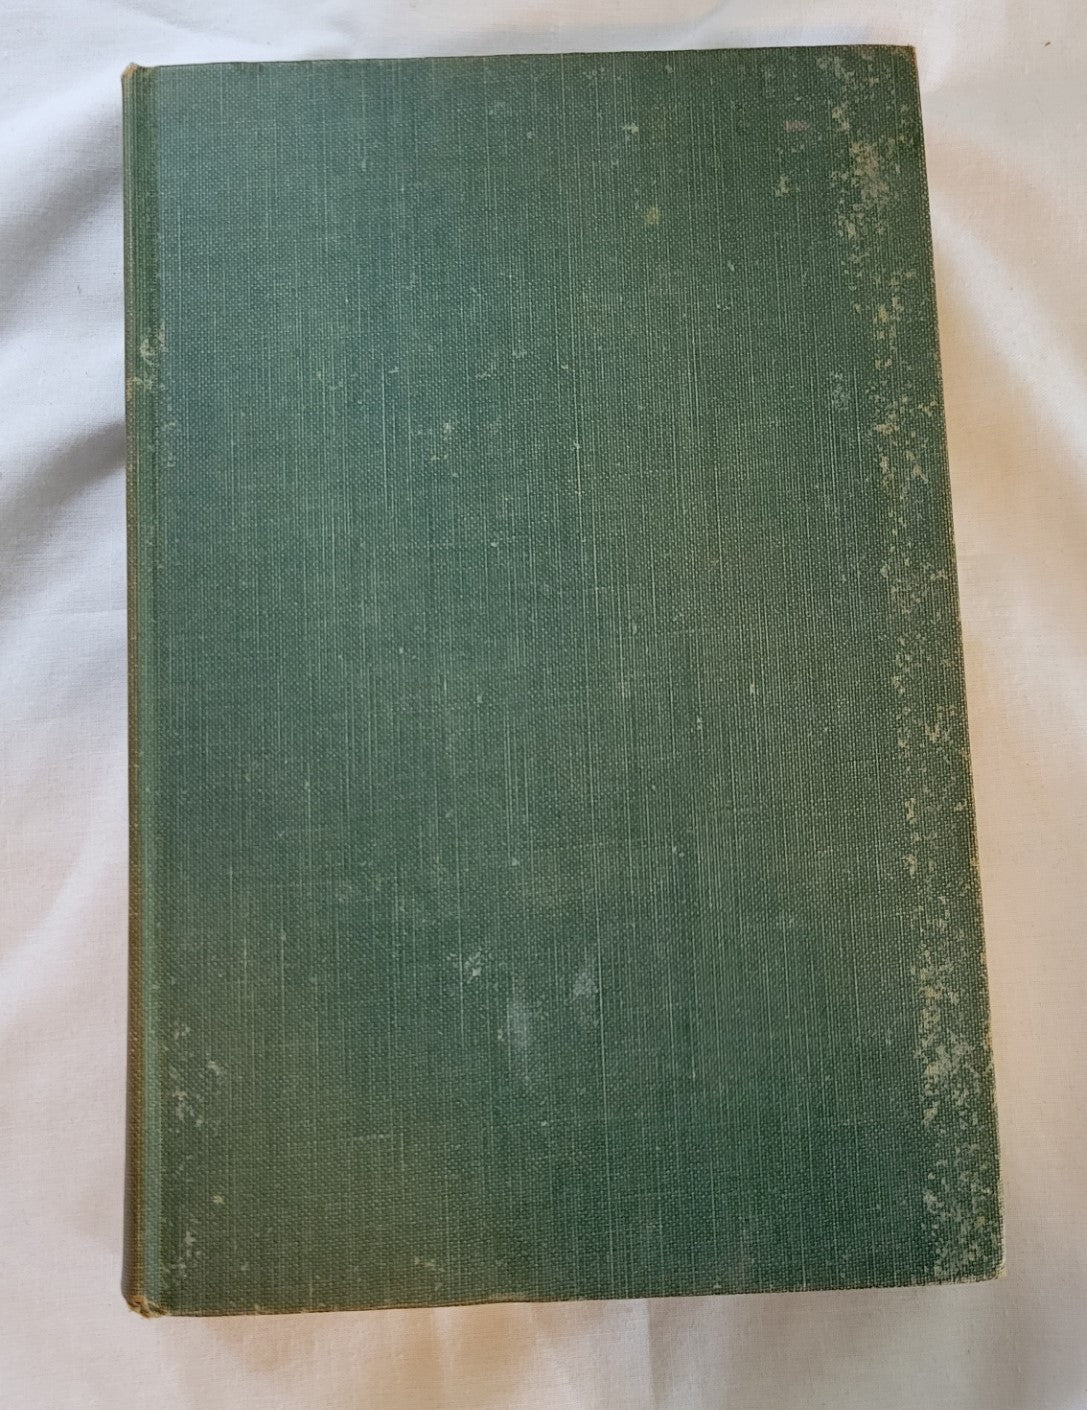 Vintage book for sale, “Light from Many Lamps” edited by Lillian Eichler Watson, 1951, a storehouse of inspired and inspiring reading, it is a collection of brief, stimulating biographies as well.  View of front cover.